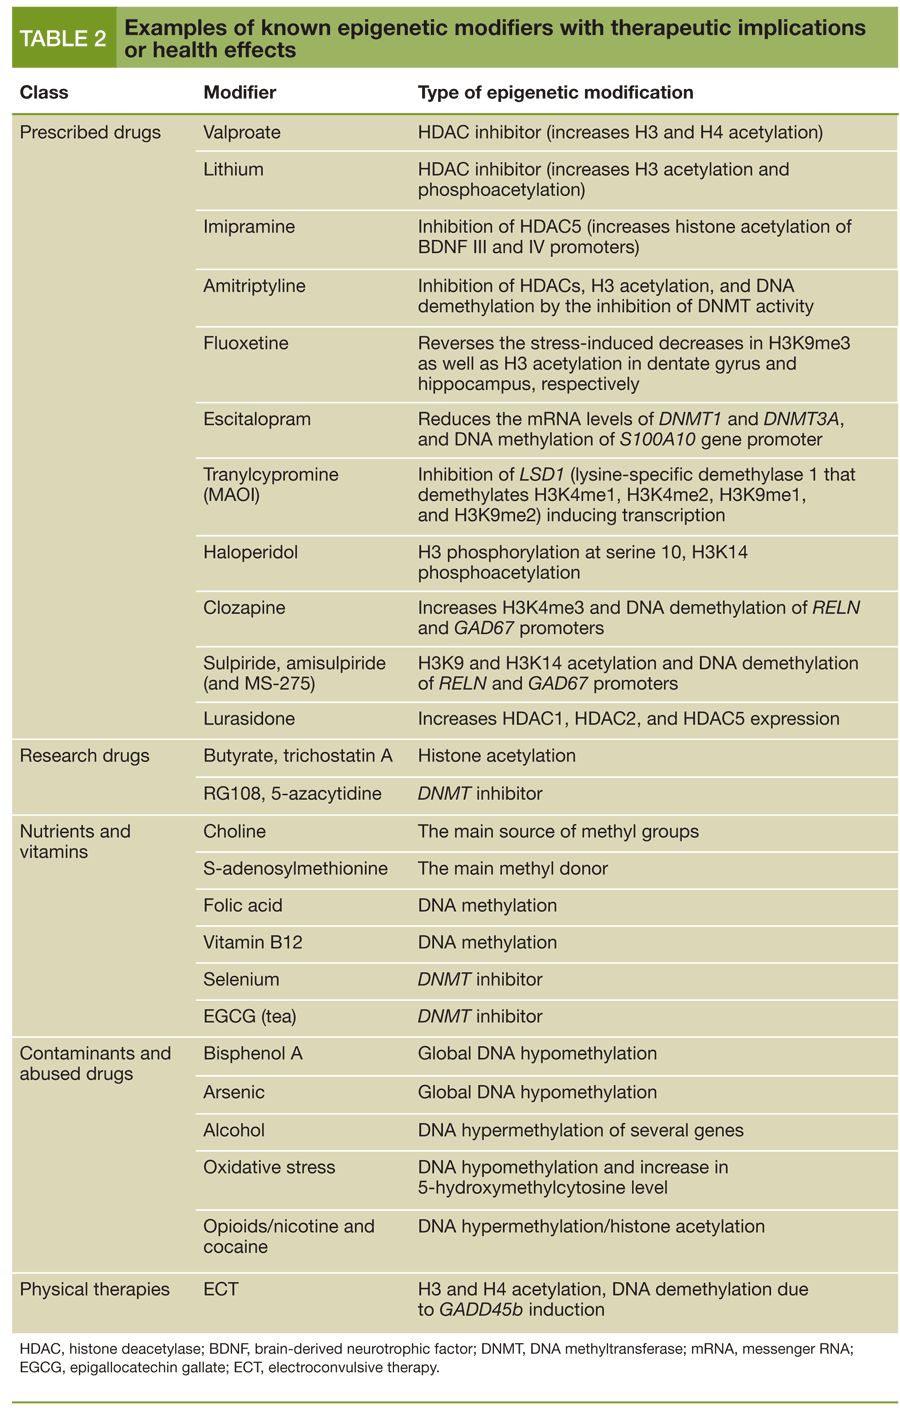 Table 2: Examples of known epigenetic modifiers with therapeutic implications or